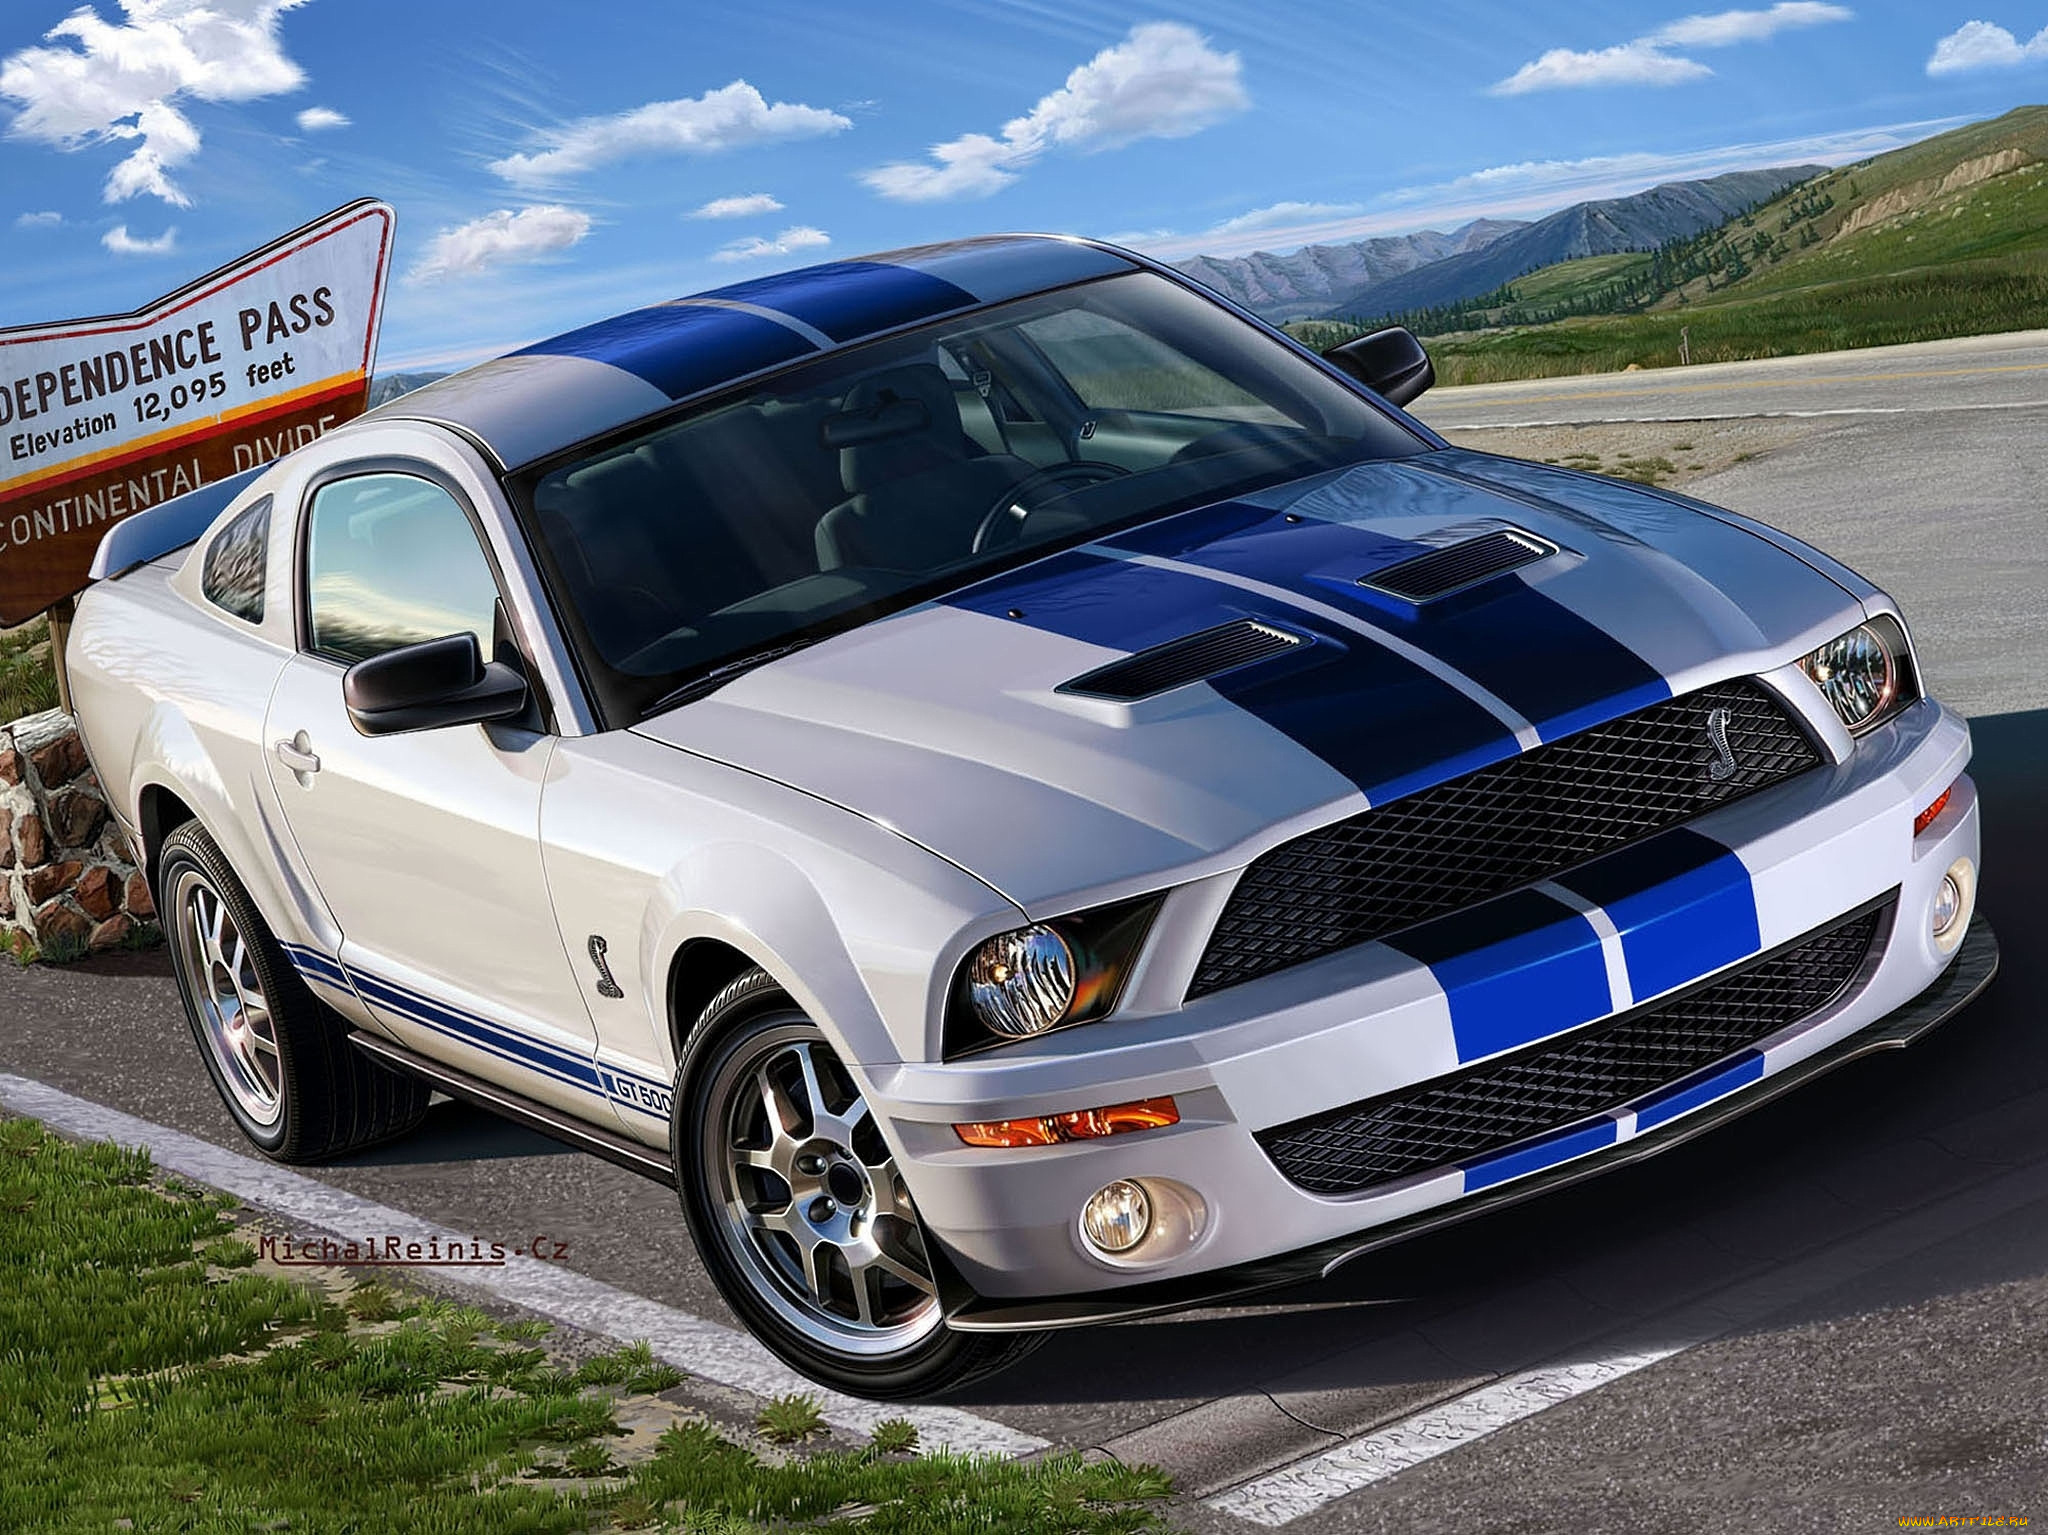 , , michal, reinis, , shelby, mustang, gt500